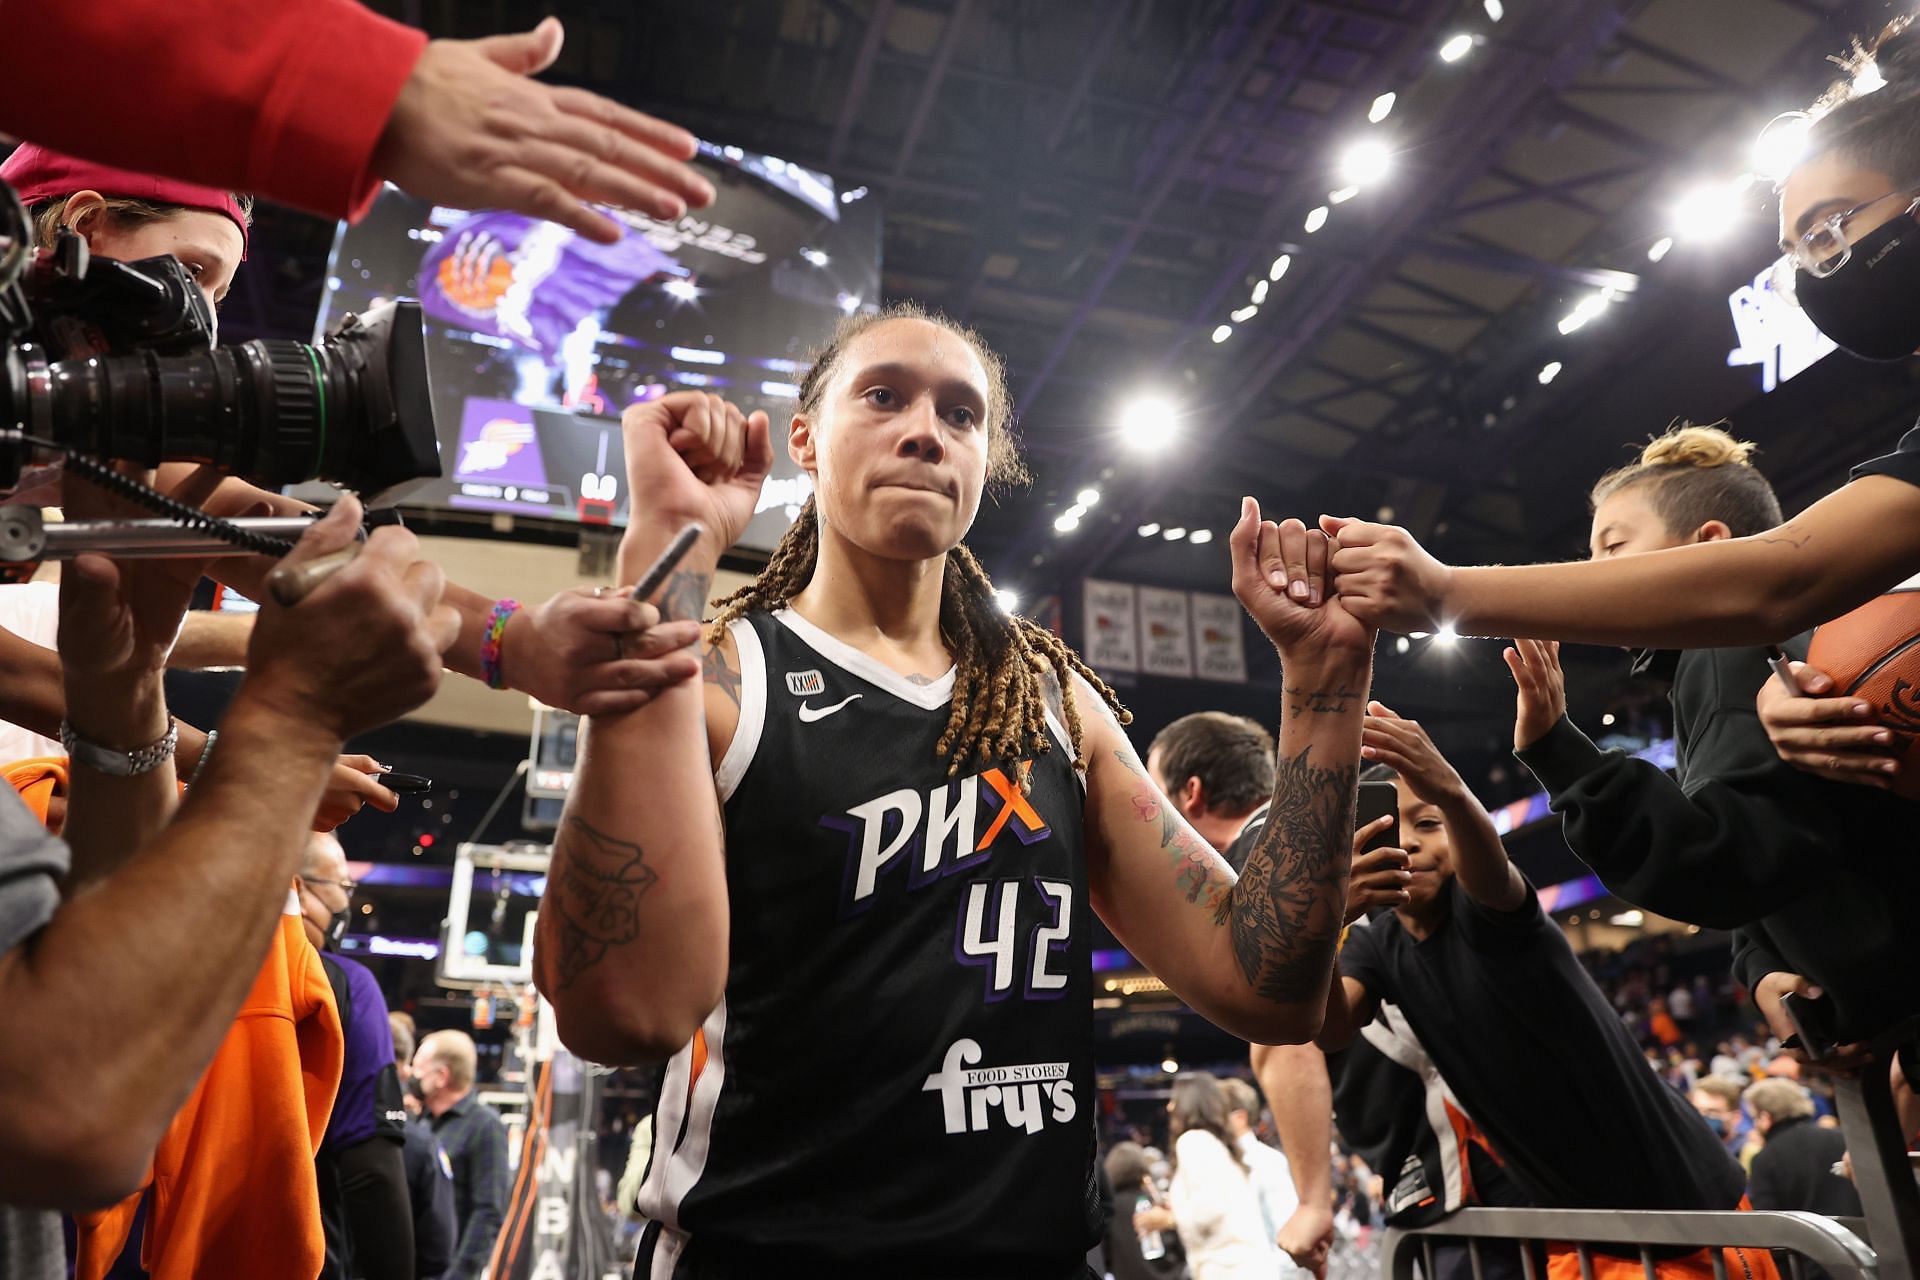 Estimating the recently convicted WNBA star